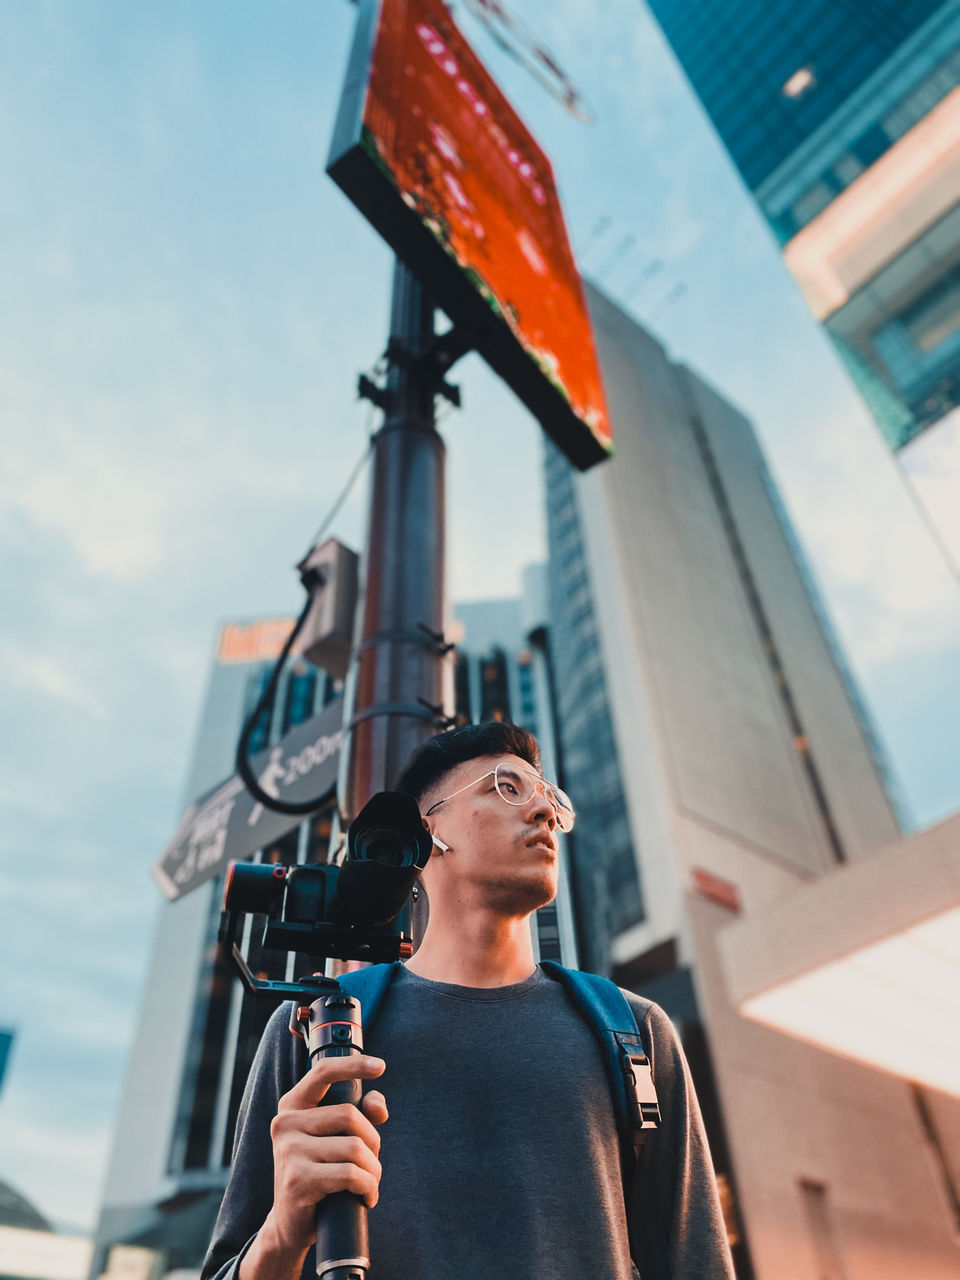 Low angle view of man holding camera standing outside buildings in city